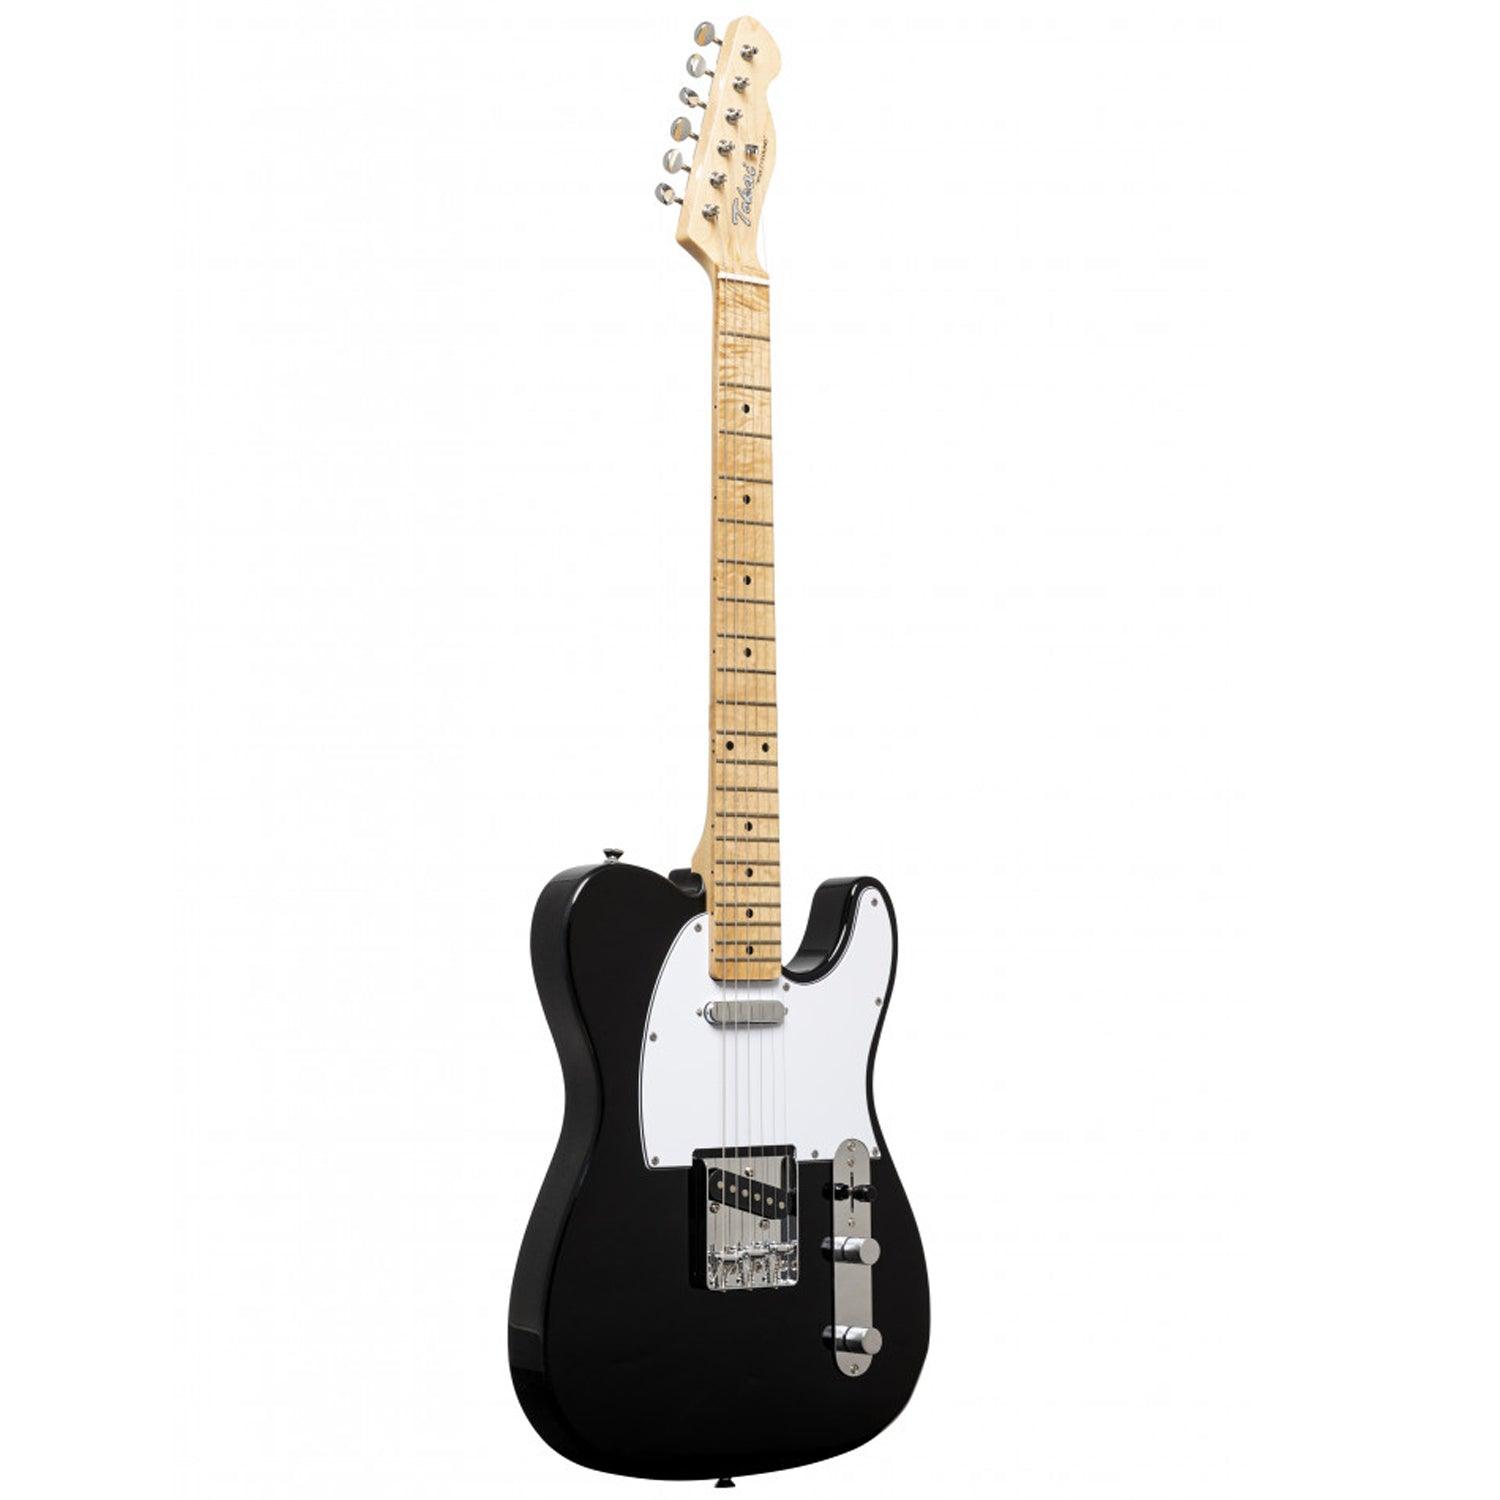 Tokai ATE52 BB Solid Body Electric Guitar, Black Finish - DY Pro Audio